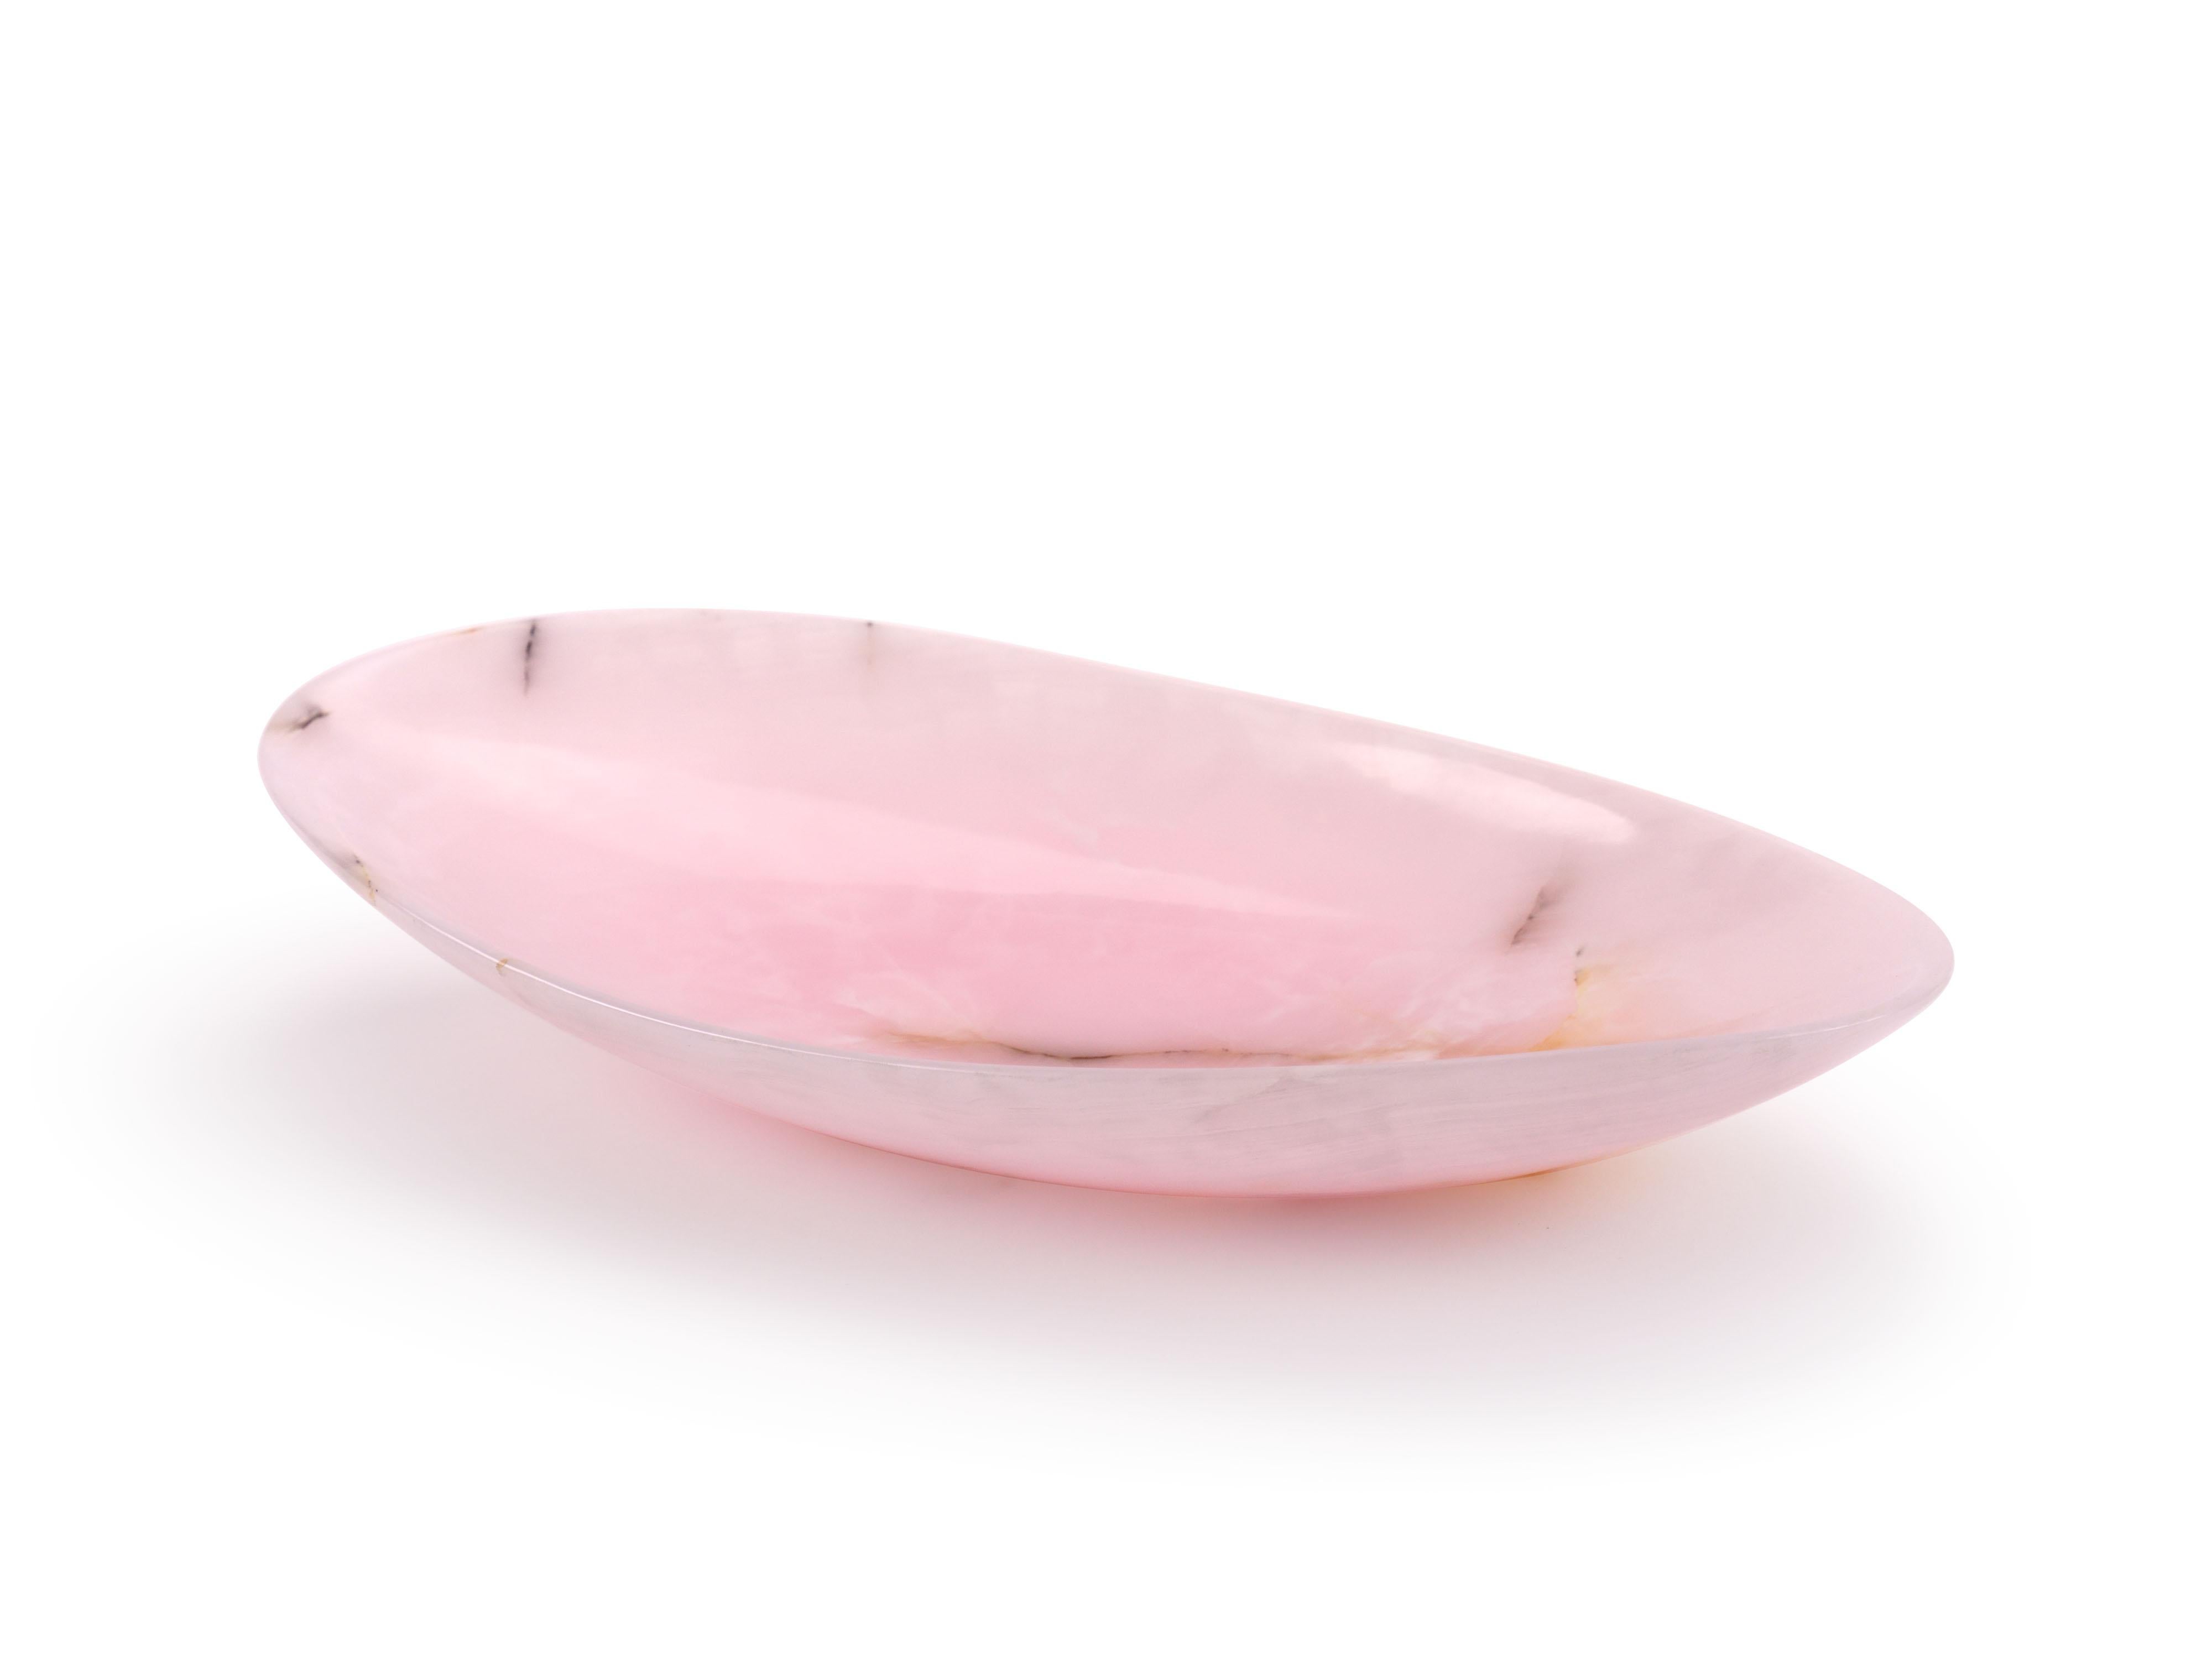 Pink Onyx Decorative Bowl Centerpiece Vase Vessel Sculpture Hand Carved, Italy In New Condition For Sale In Ancona, Marche